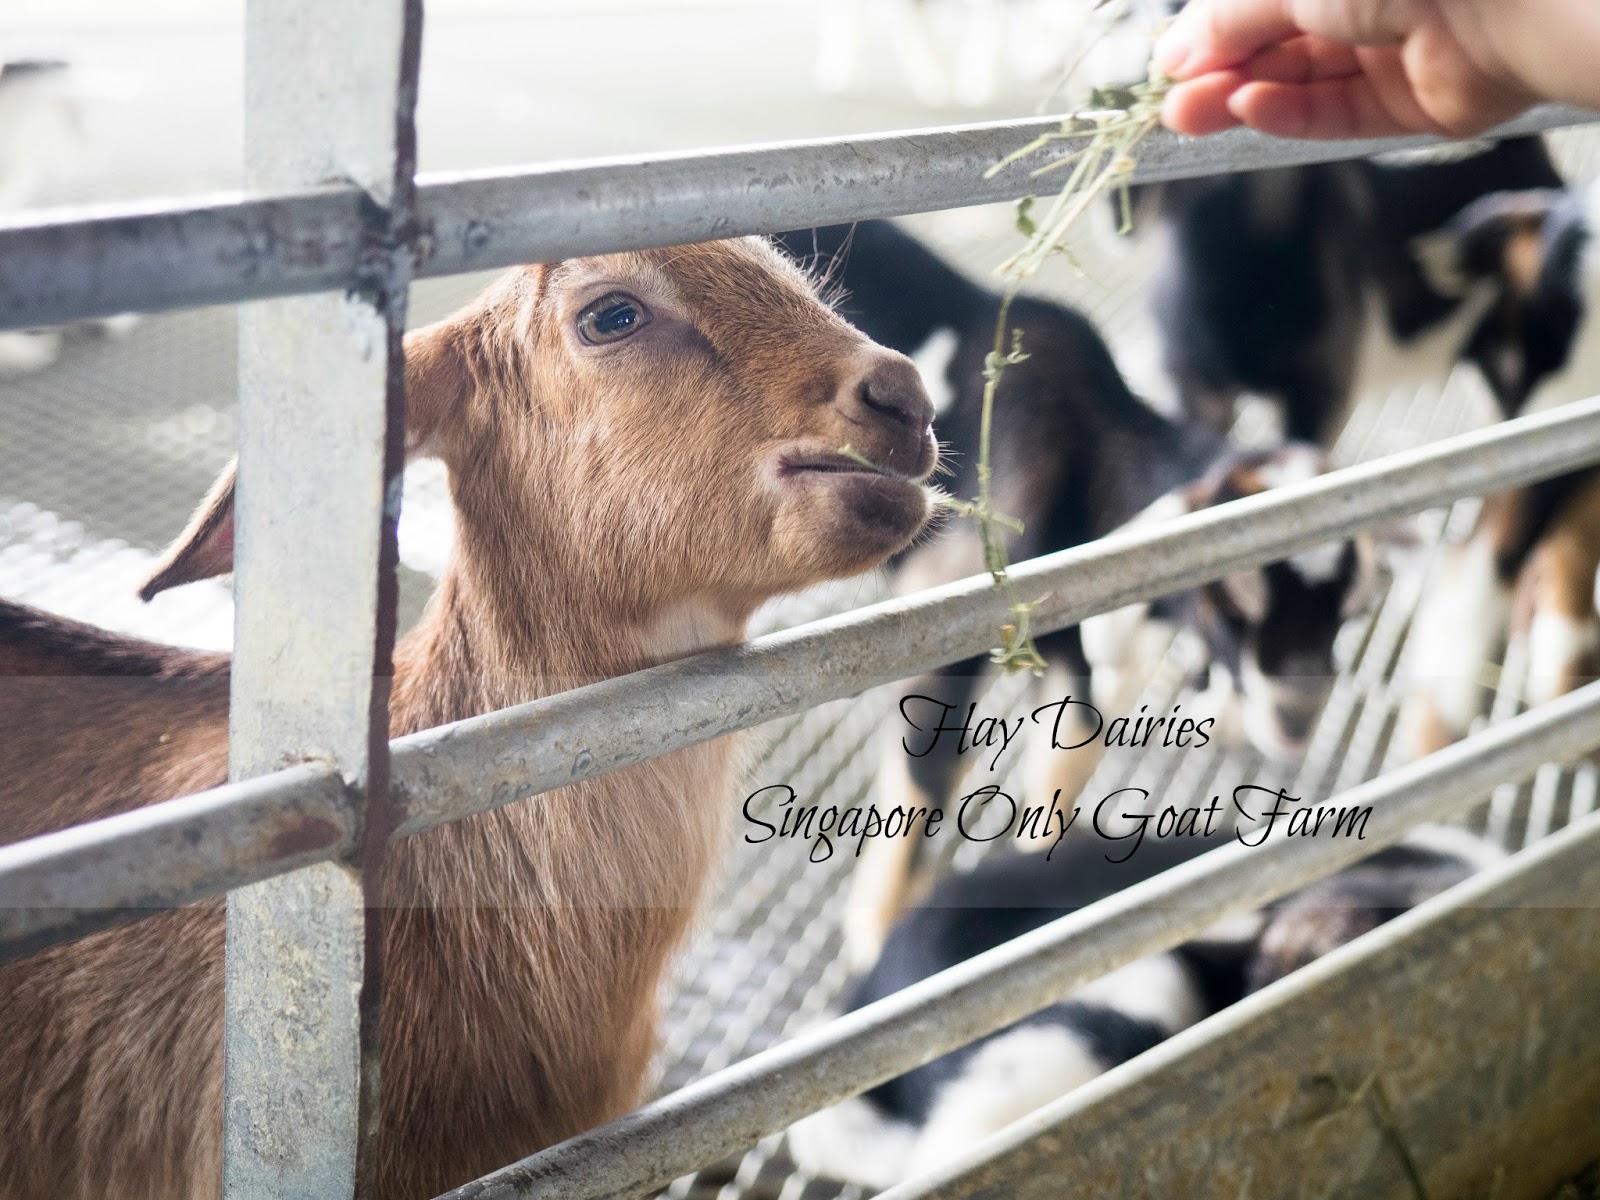 Hay Dairies - Singapore Goat Farm Review | The Wacky Duo | Singapore Family Lifestyle Travel Website